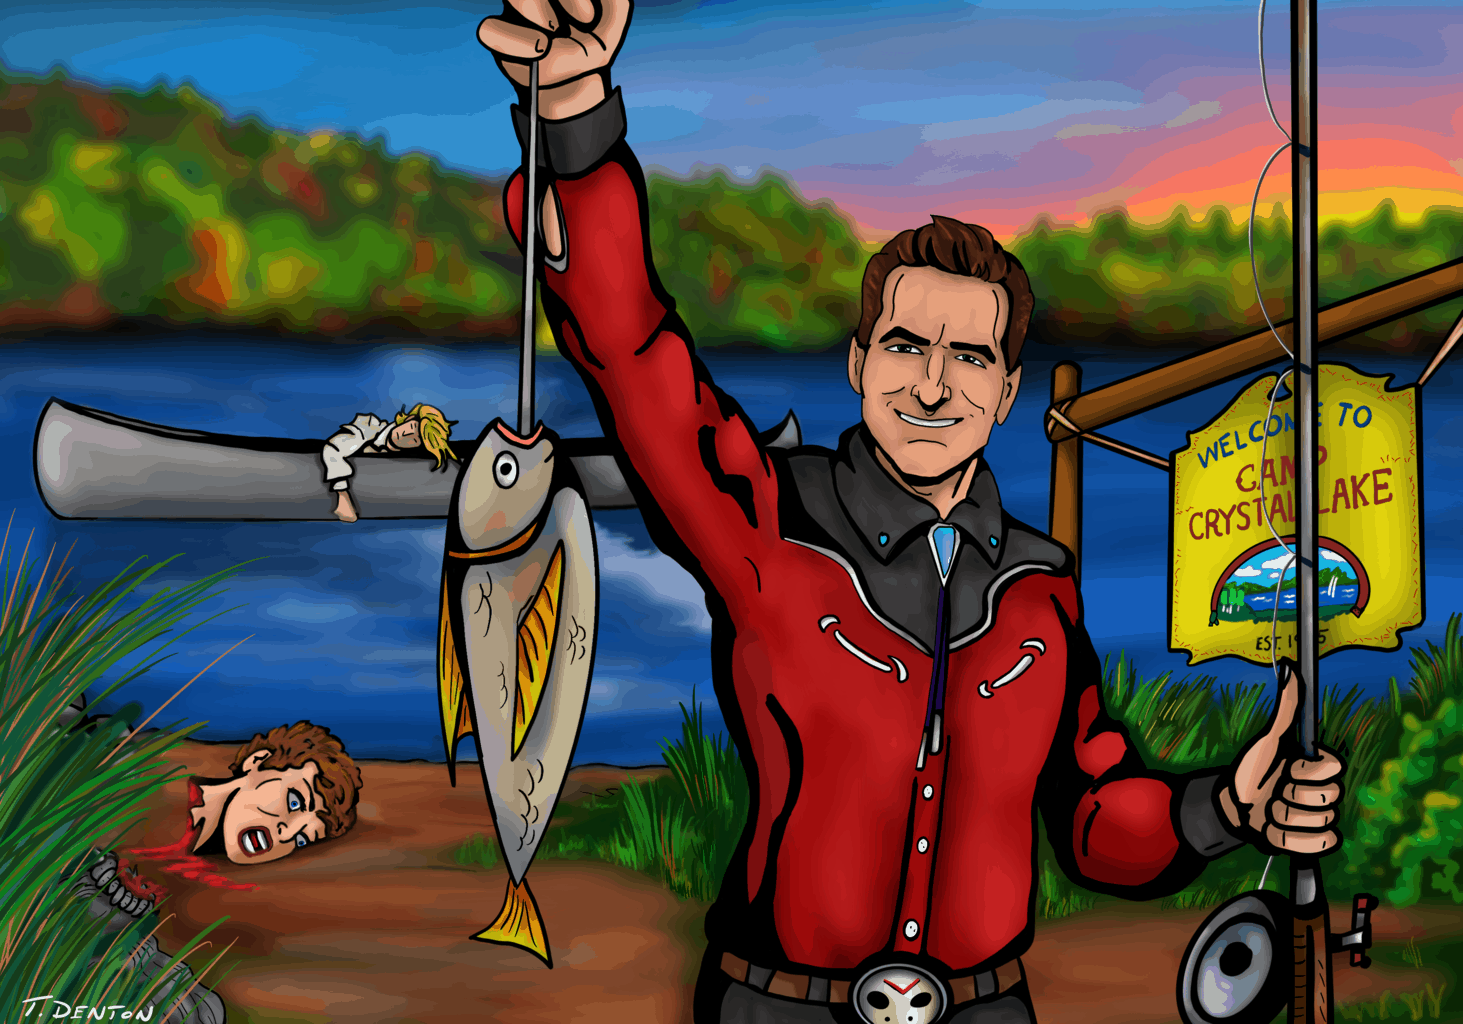 An illustrated image of Joe Bob Briggs showing off his daily catch at Camp Crytal Lake with Mrs. Vorhees' severed head in the background